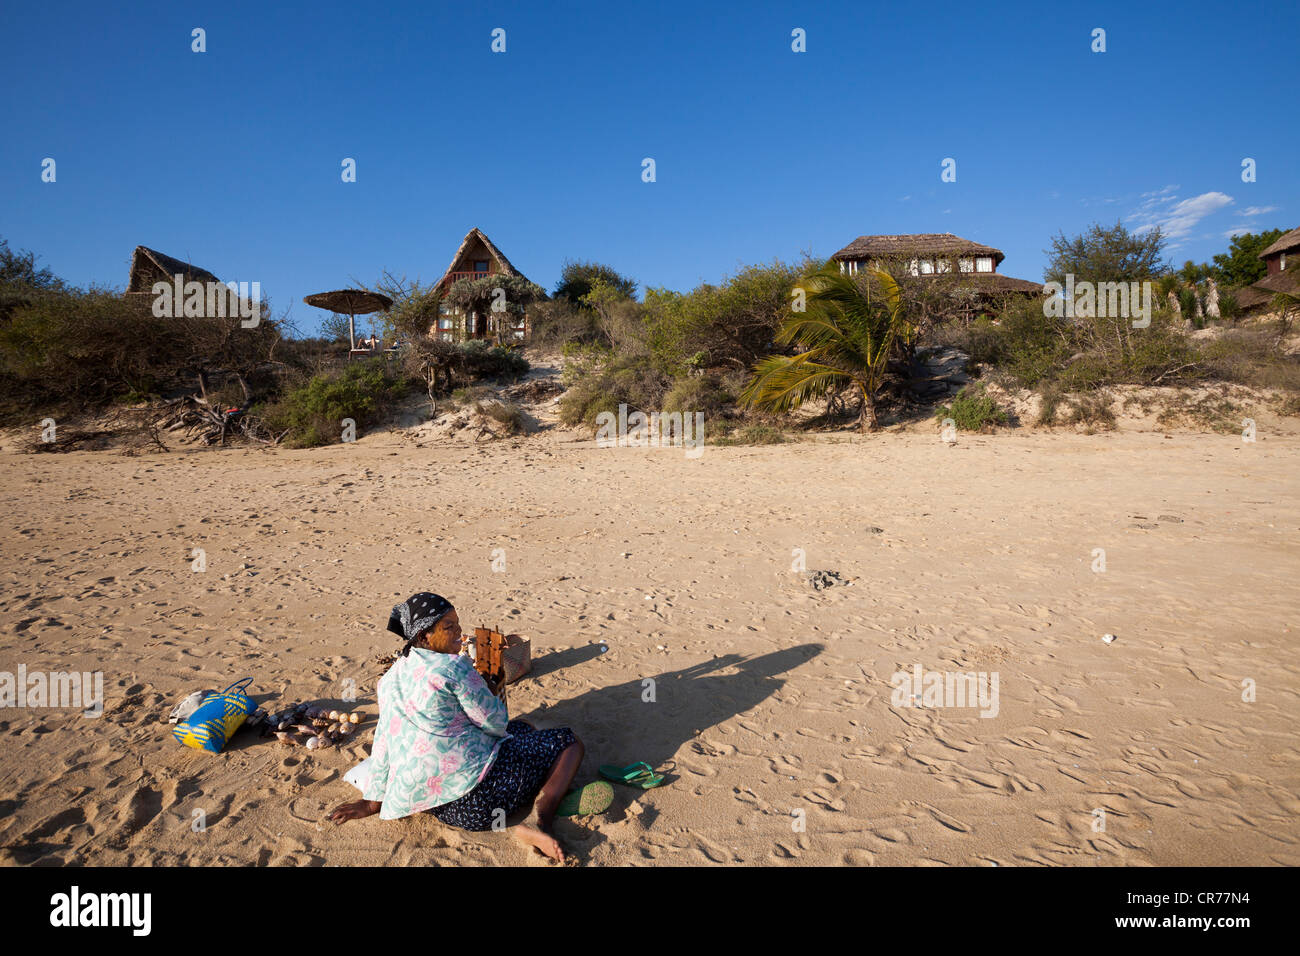 Malagasy woman selling sea shells on beach in front of chalets of Paradisier luxury hotel, Ifaty, Madagascar Stock Photo